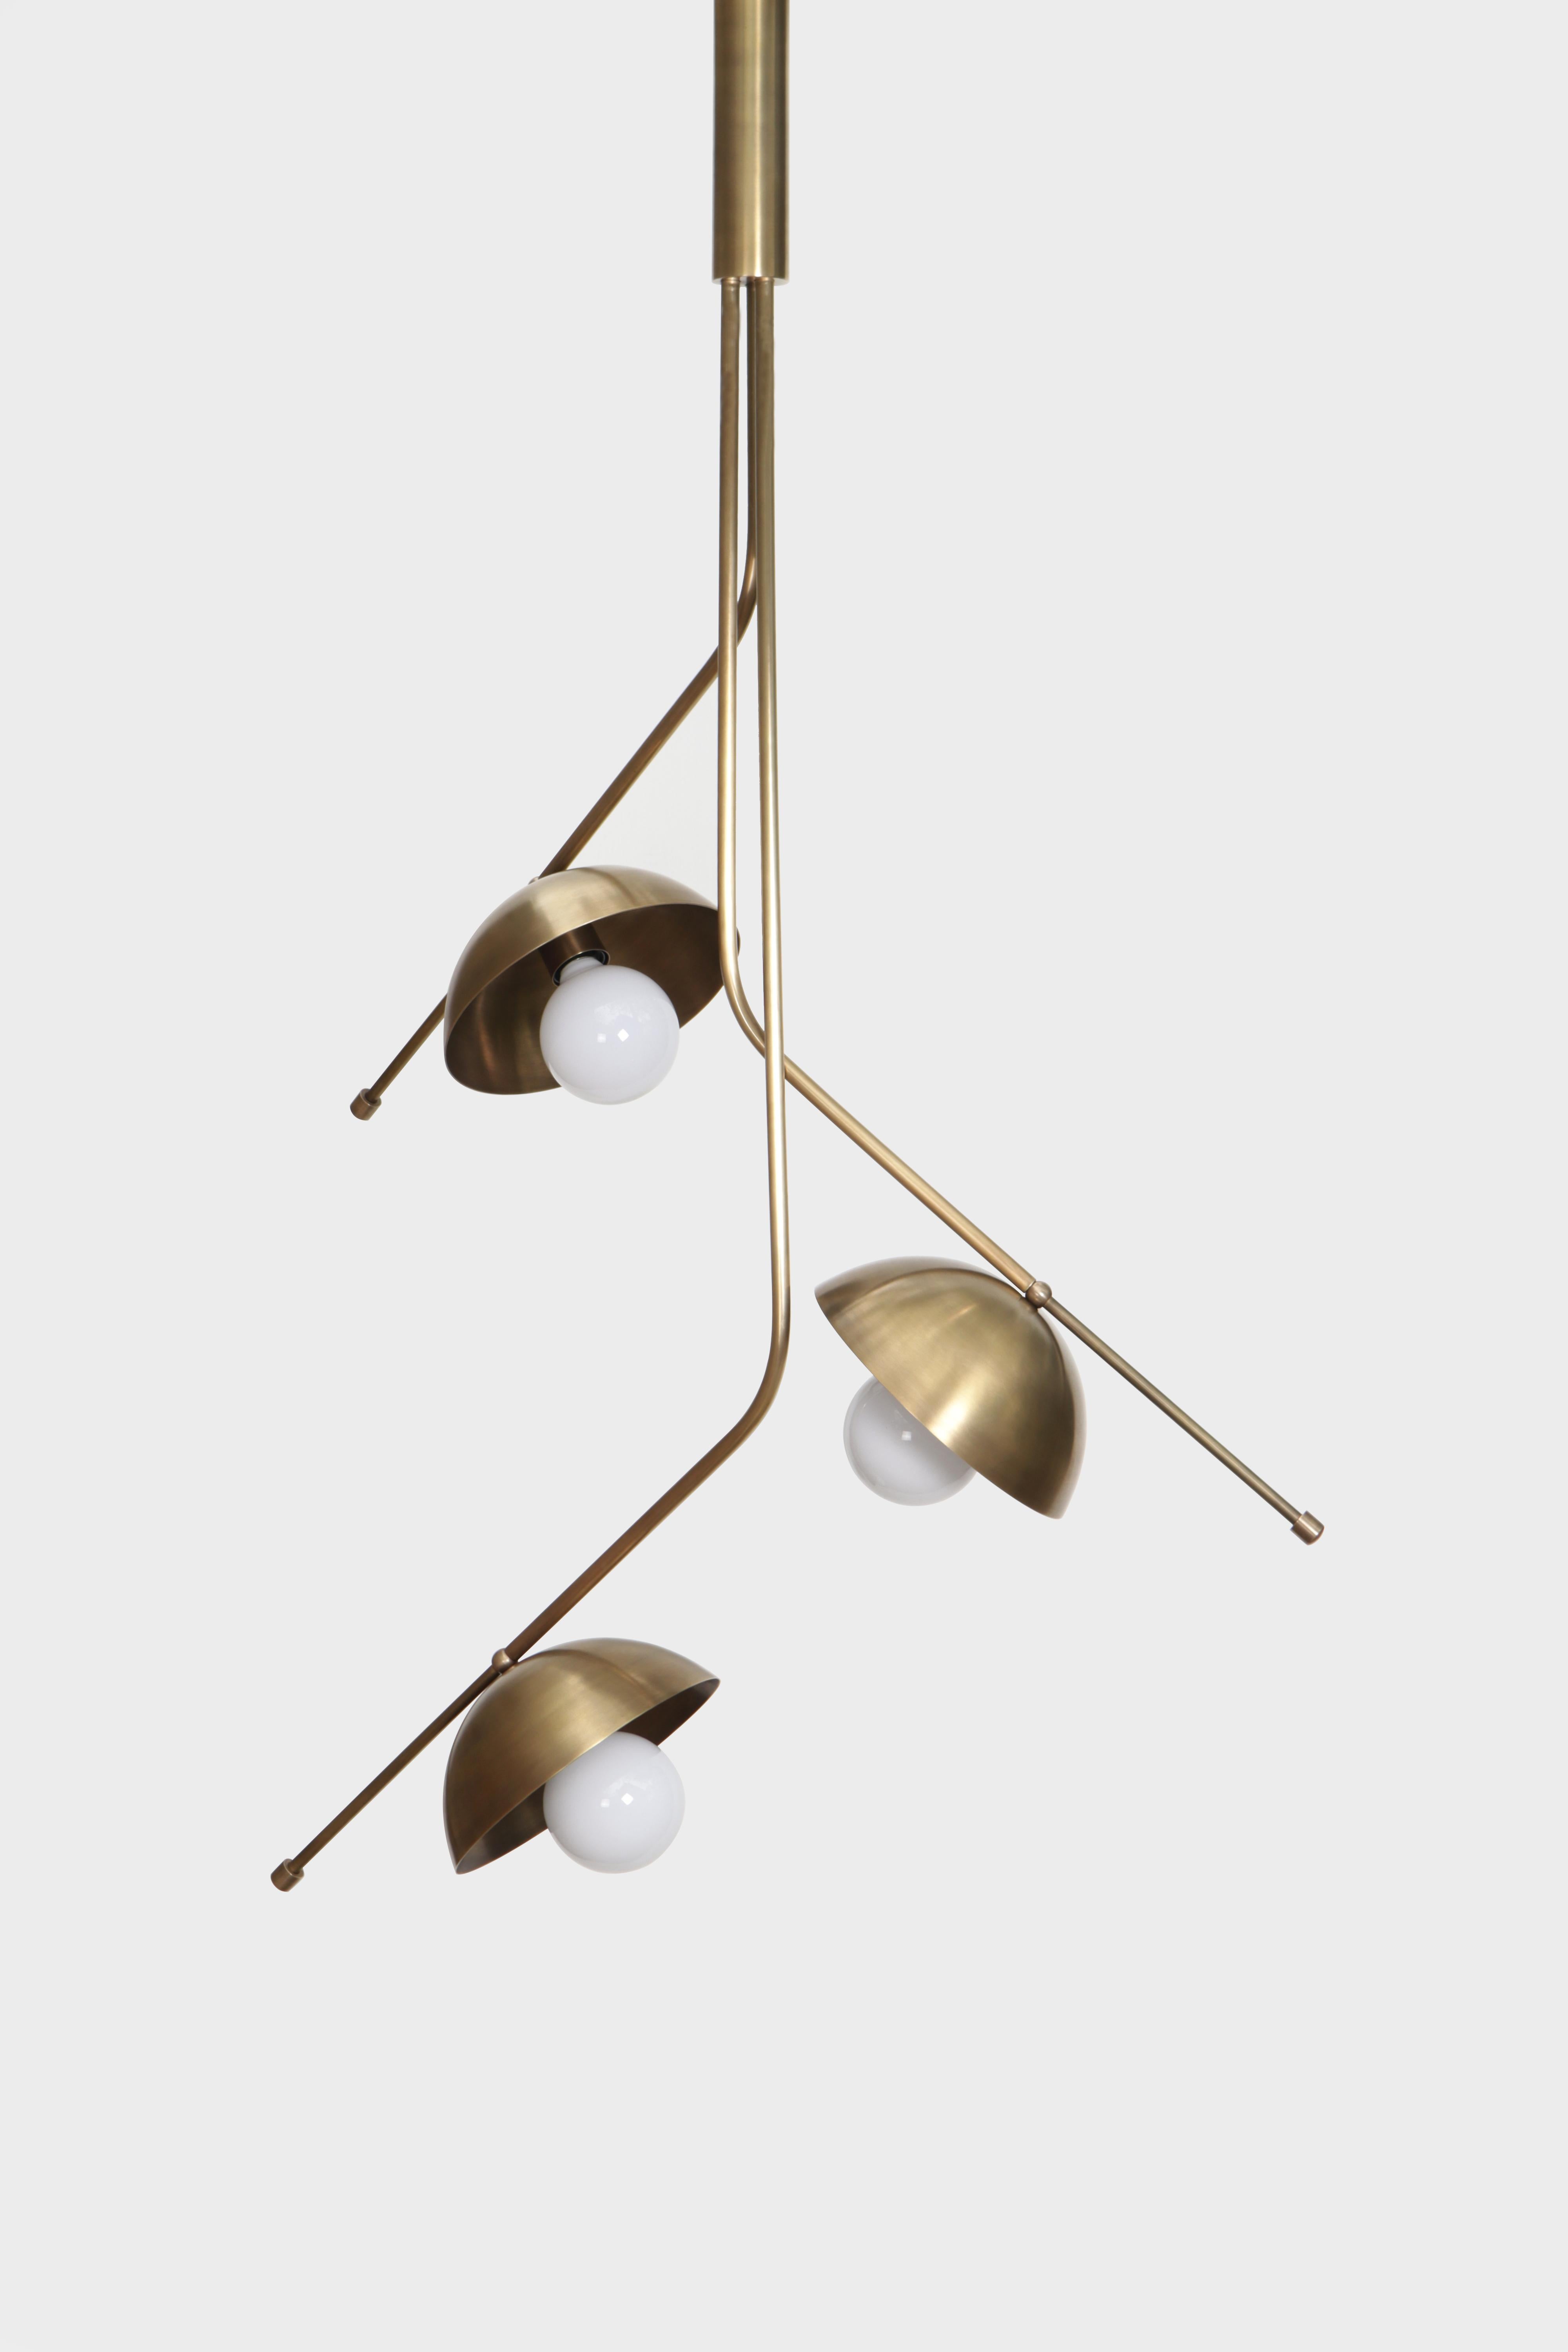 Wing 3 Brass Dome Pendant Lamp by Lamp Shaper
Dimensions: D 84 x W 84 x H 140 cm.
Materials: Brass.

Different finishes available: raw brass, aged brass, burnt brass and brushed brass Please contact us.

All our lamps can be wired according to each